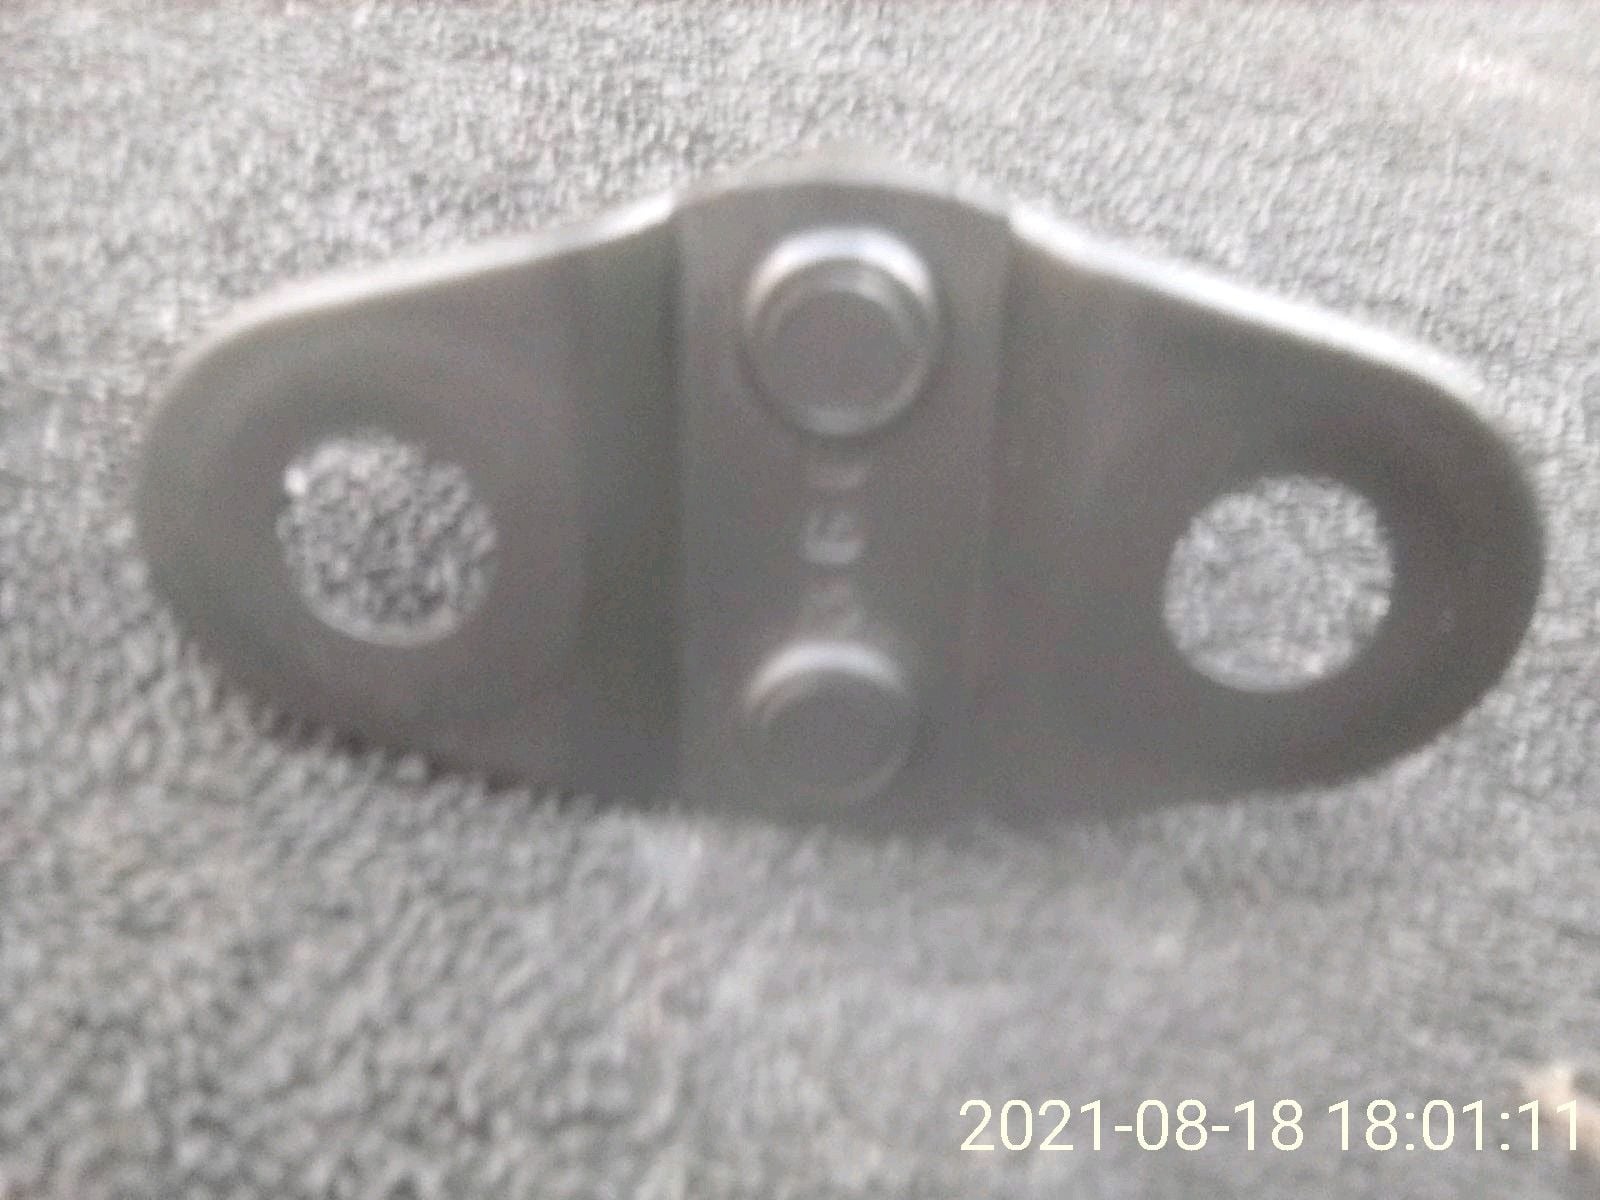 Miscellaneous - FD - OEM Rear Lift Hatch Striker - Used - 1993 to 2002 Mazda RX-7 - San Jose, CA 95121, United States